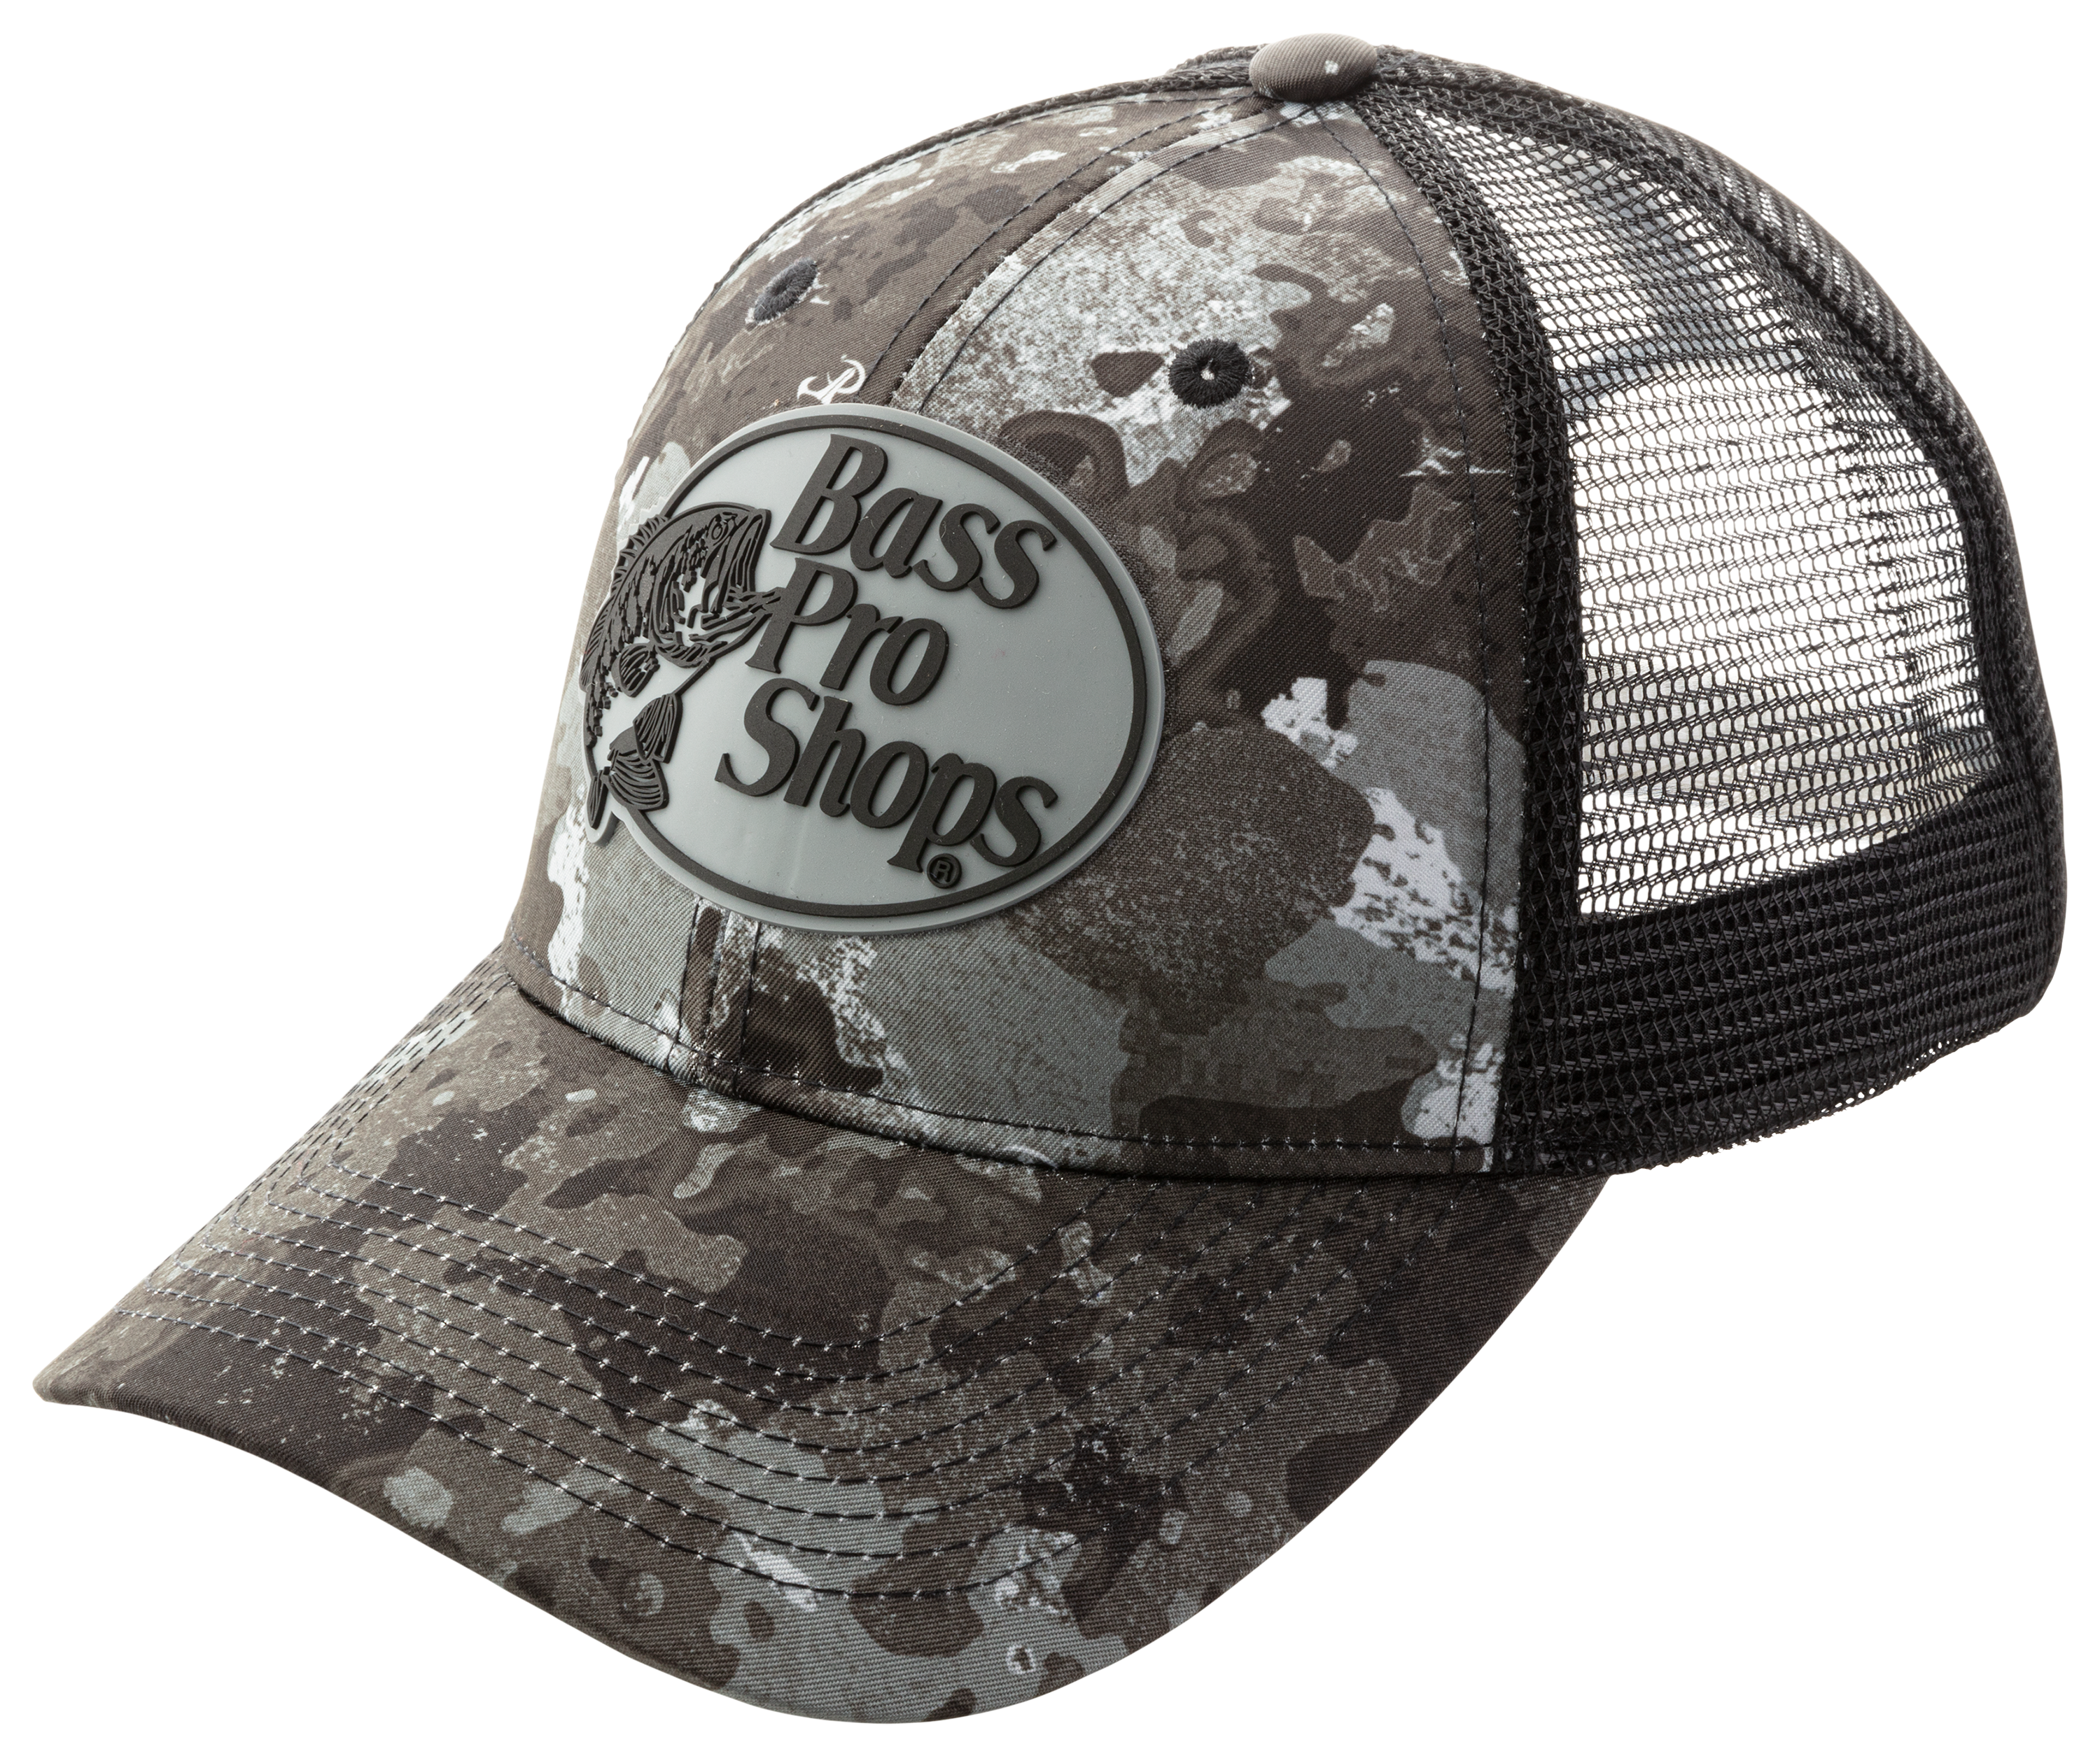 Authentic Black Bass Pro Shops Hat Adjustable With Tags choose Your Color  Fast Free USA Shipping -  Israel